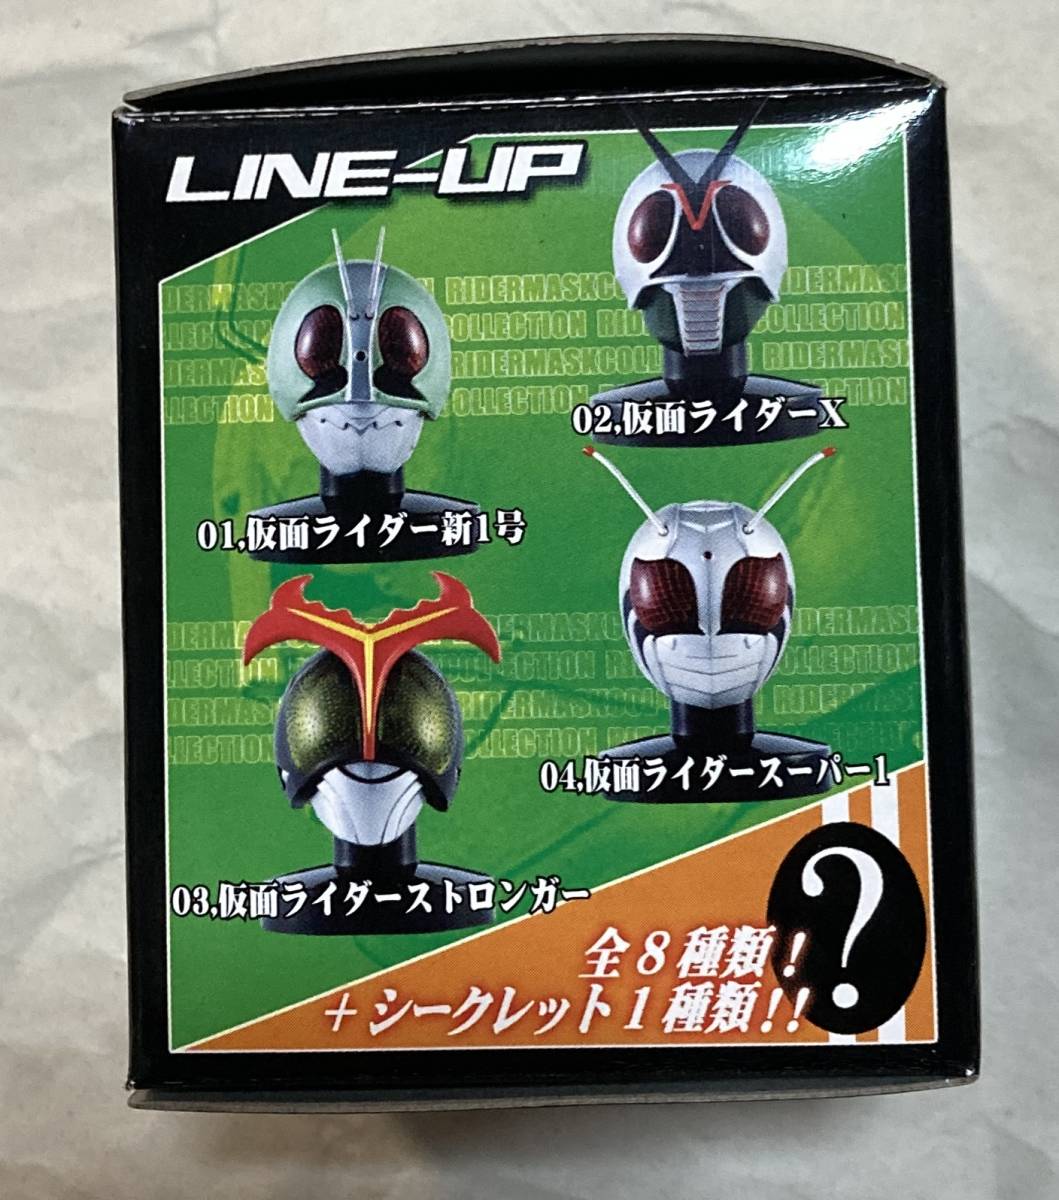  Kamen Rider super 1 [ Kamen Rider rider mask collection ]* contents verification therefore box . opened *